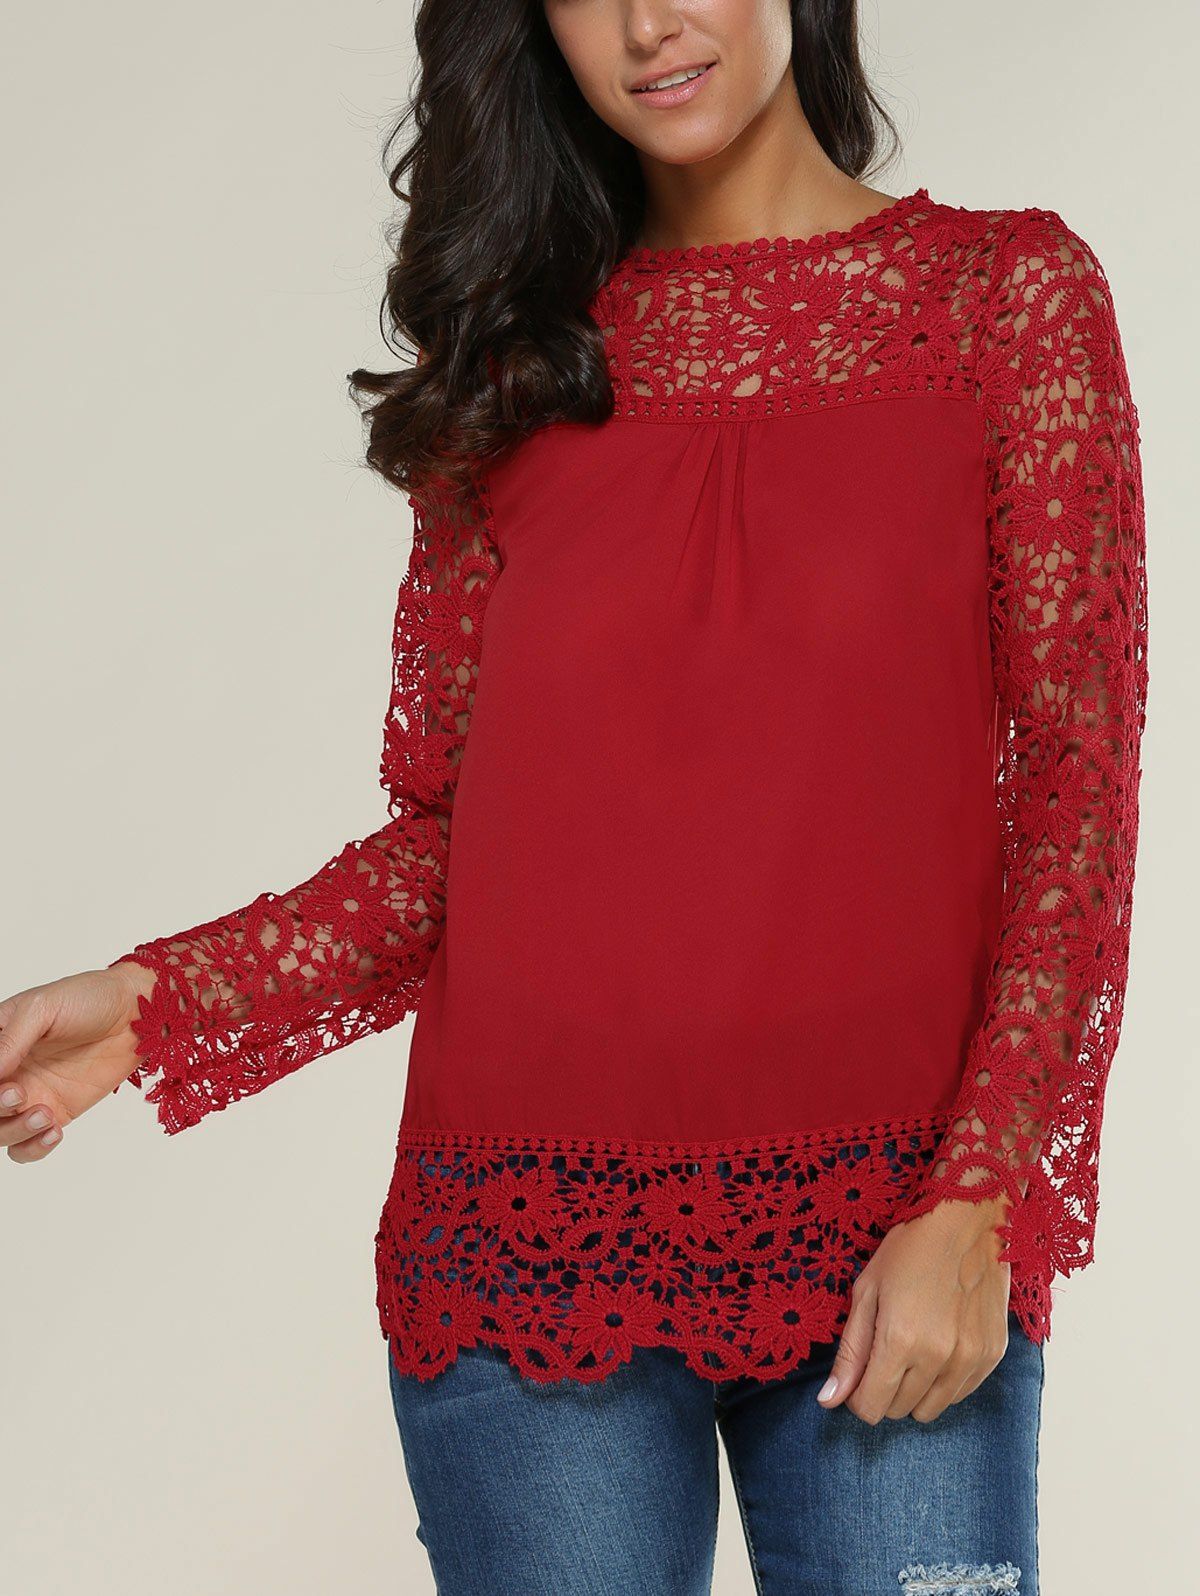 [52% OFF] Lace Spliced Floral Crochet Openwork Blouse | Rosegal